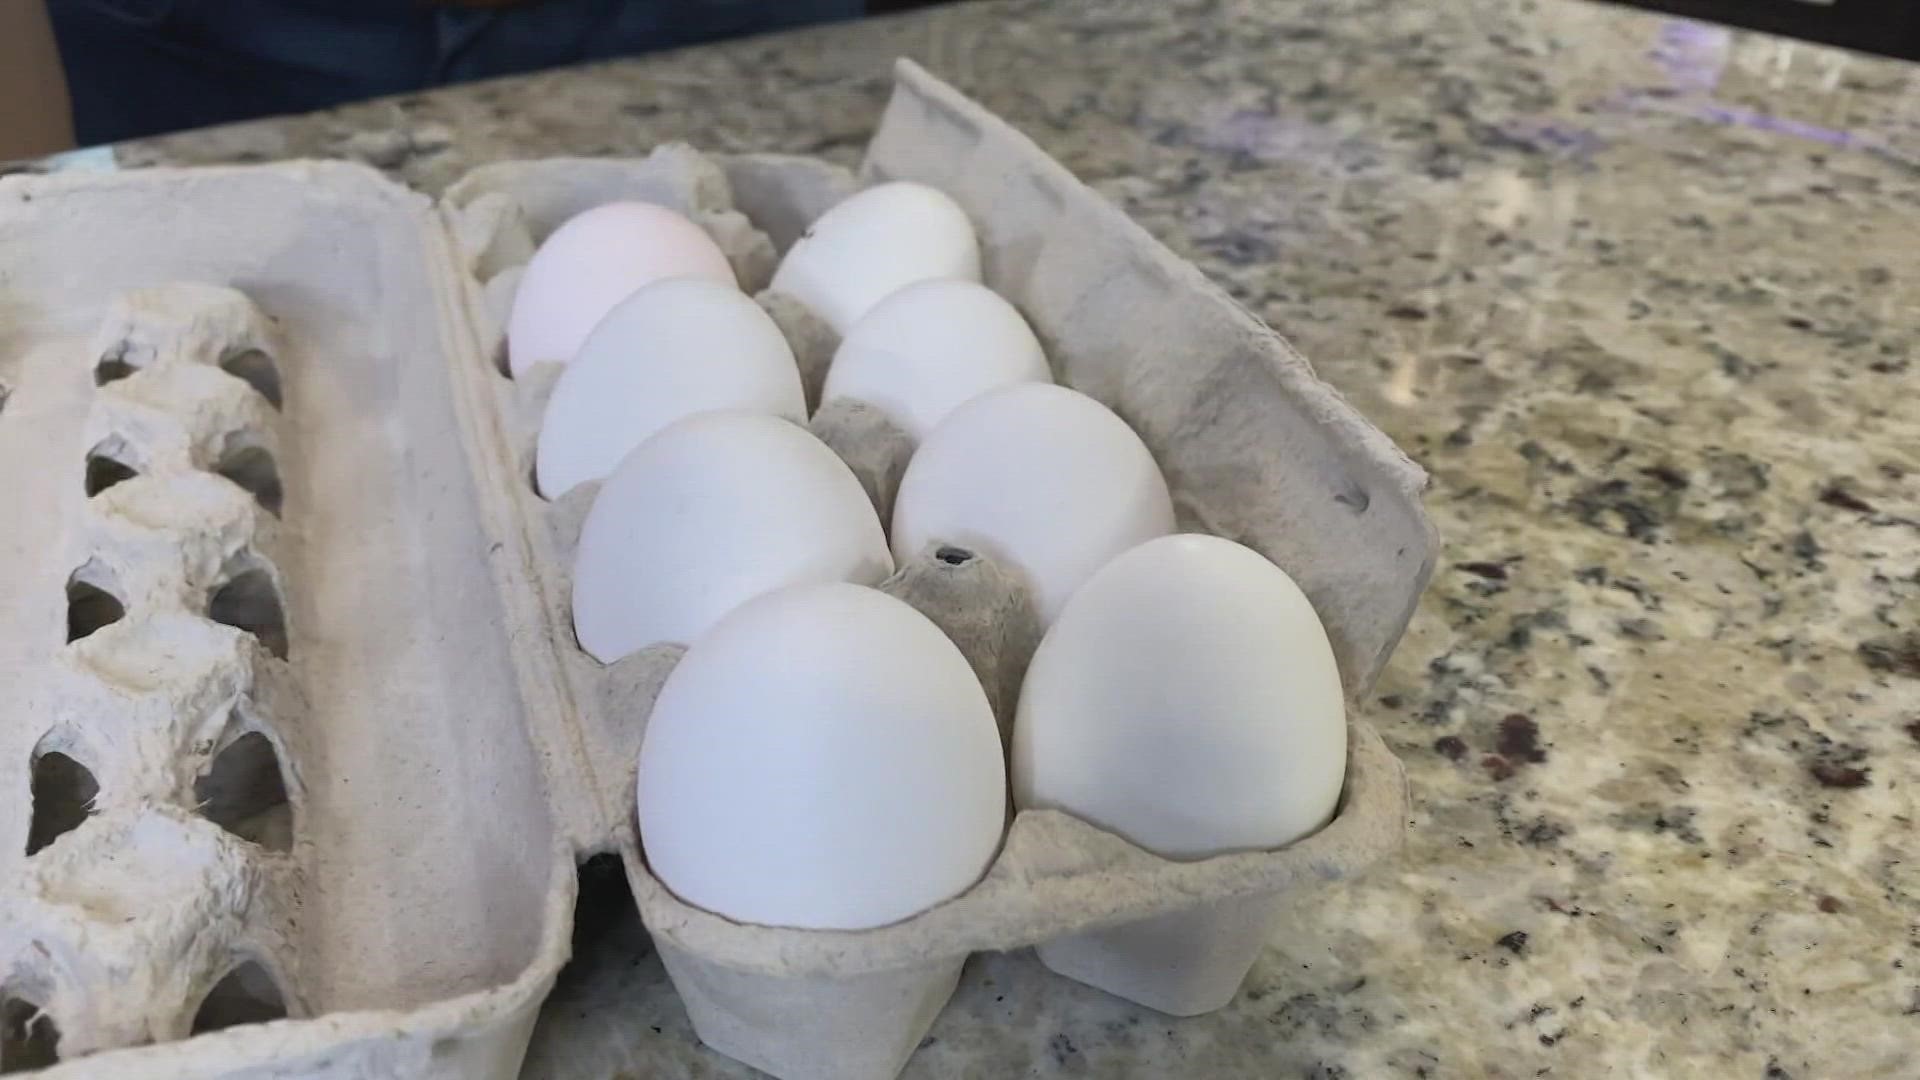 Steve Spangler invites you to take these scientific egg challenges.